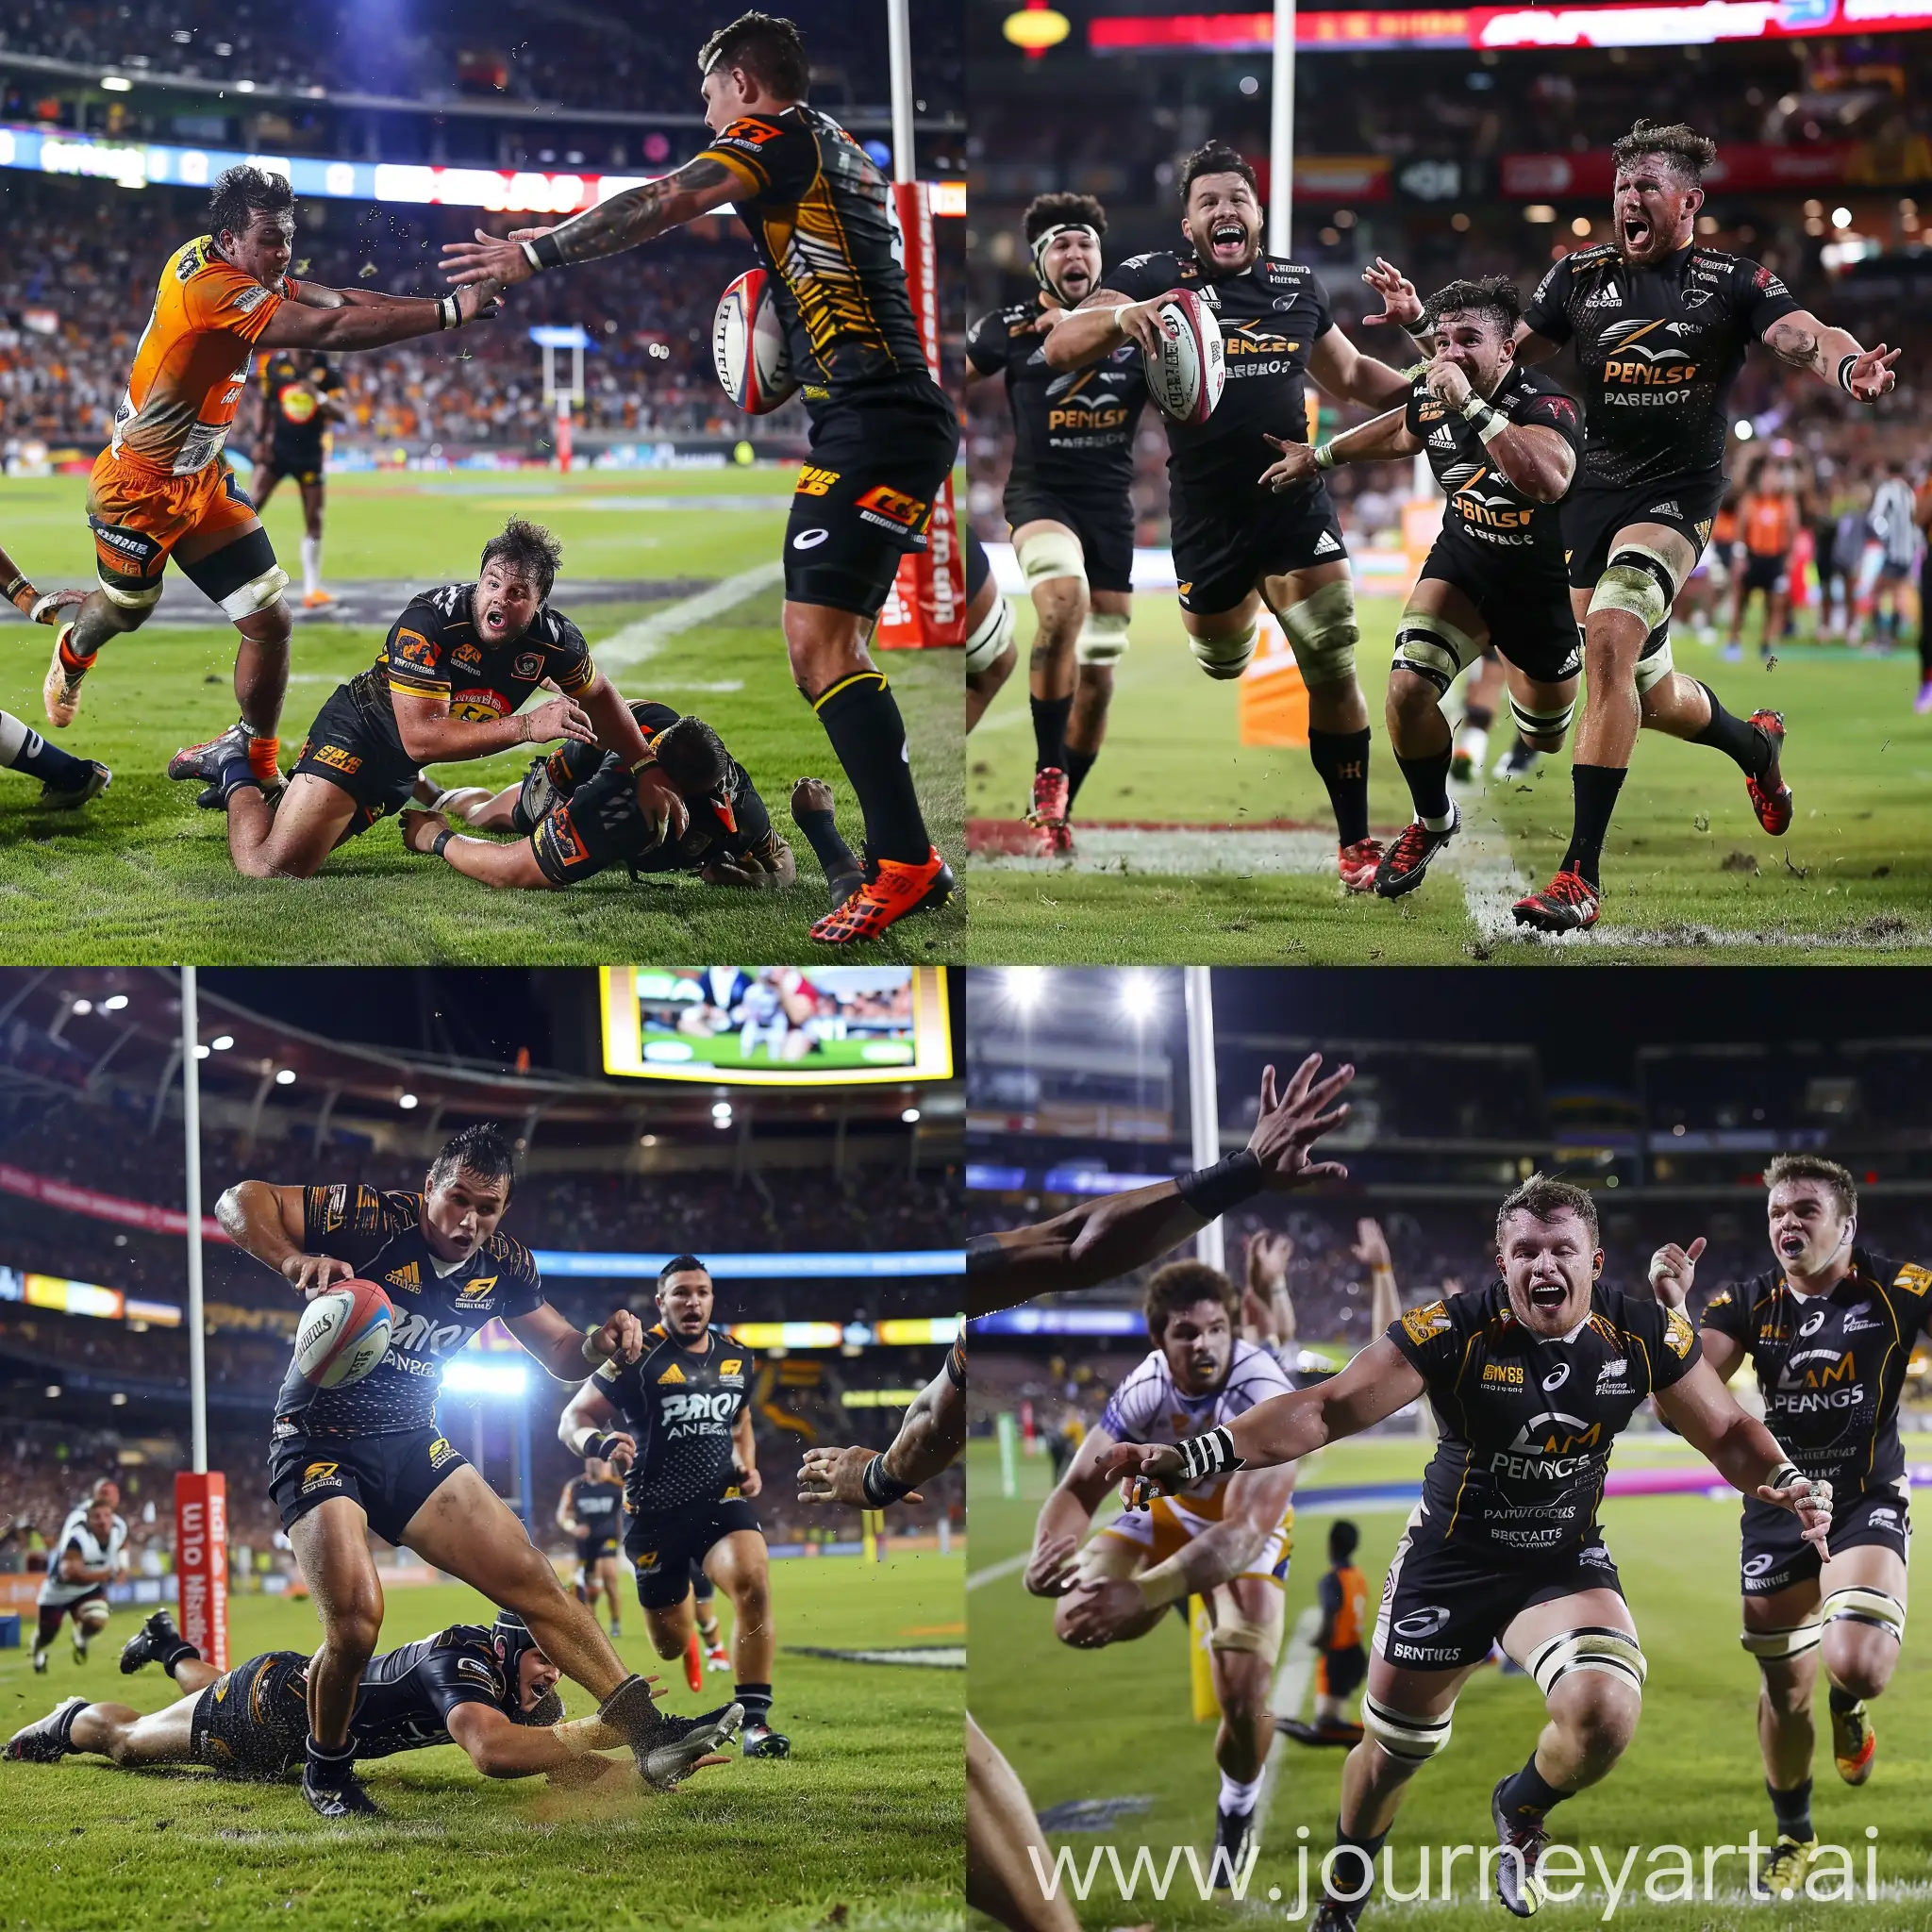 Penrith-Panthers-Players-Scoring-Against-Brisbane-Broncos-in-Intense-Match